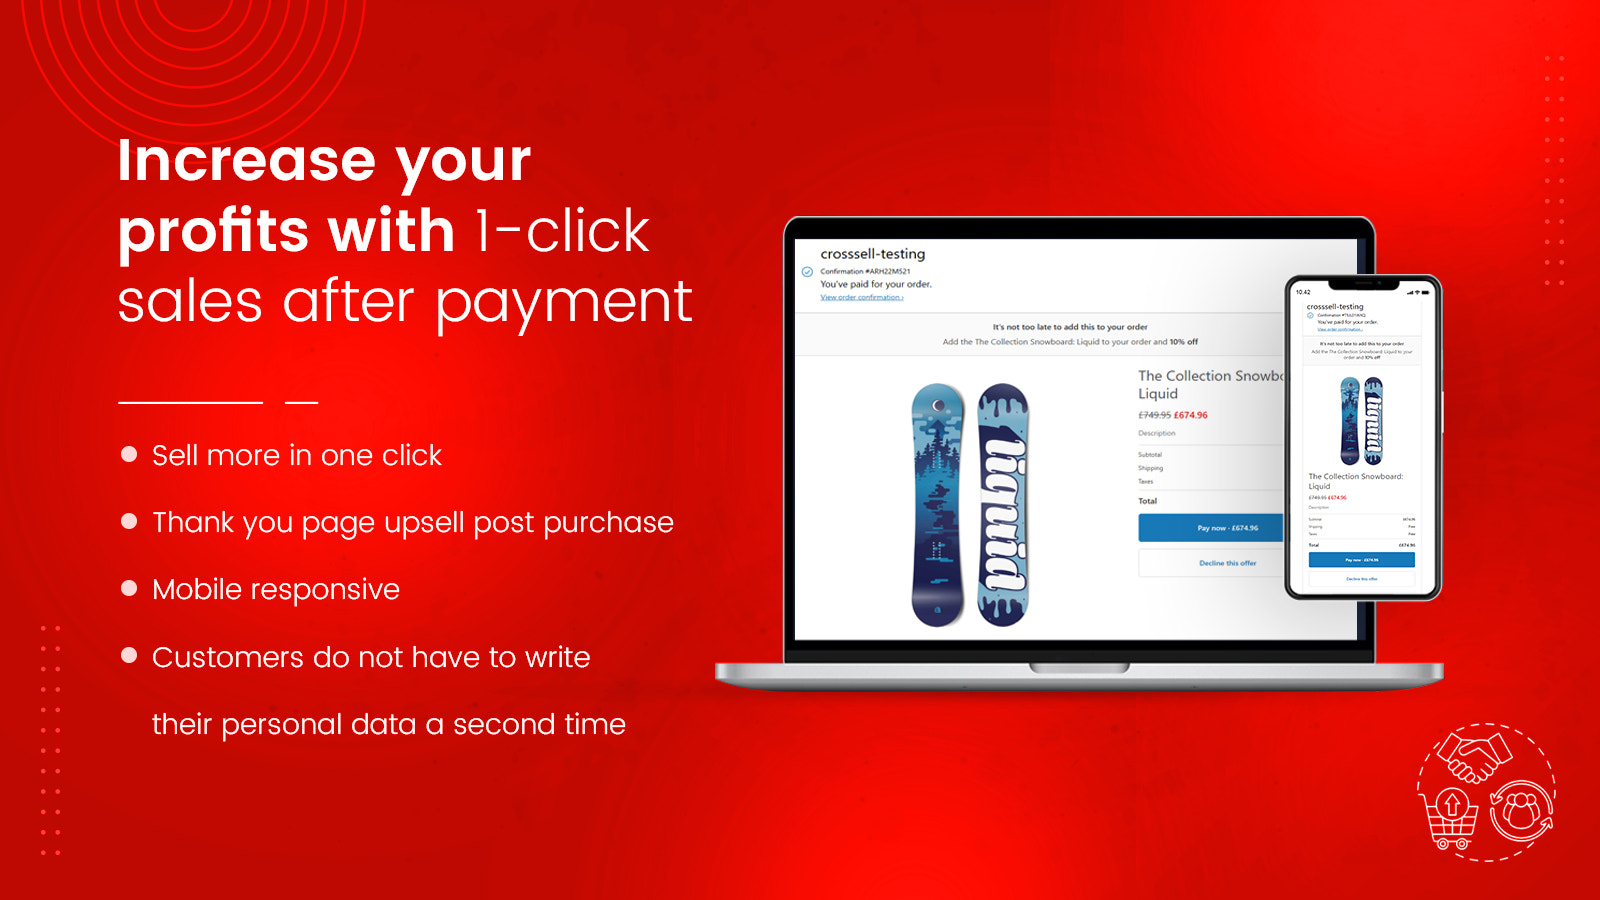 Increase your profits with 1-click sales after payment